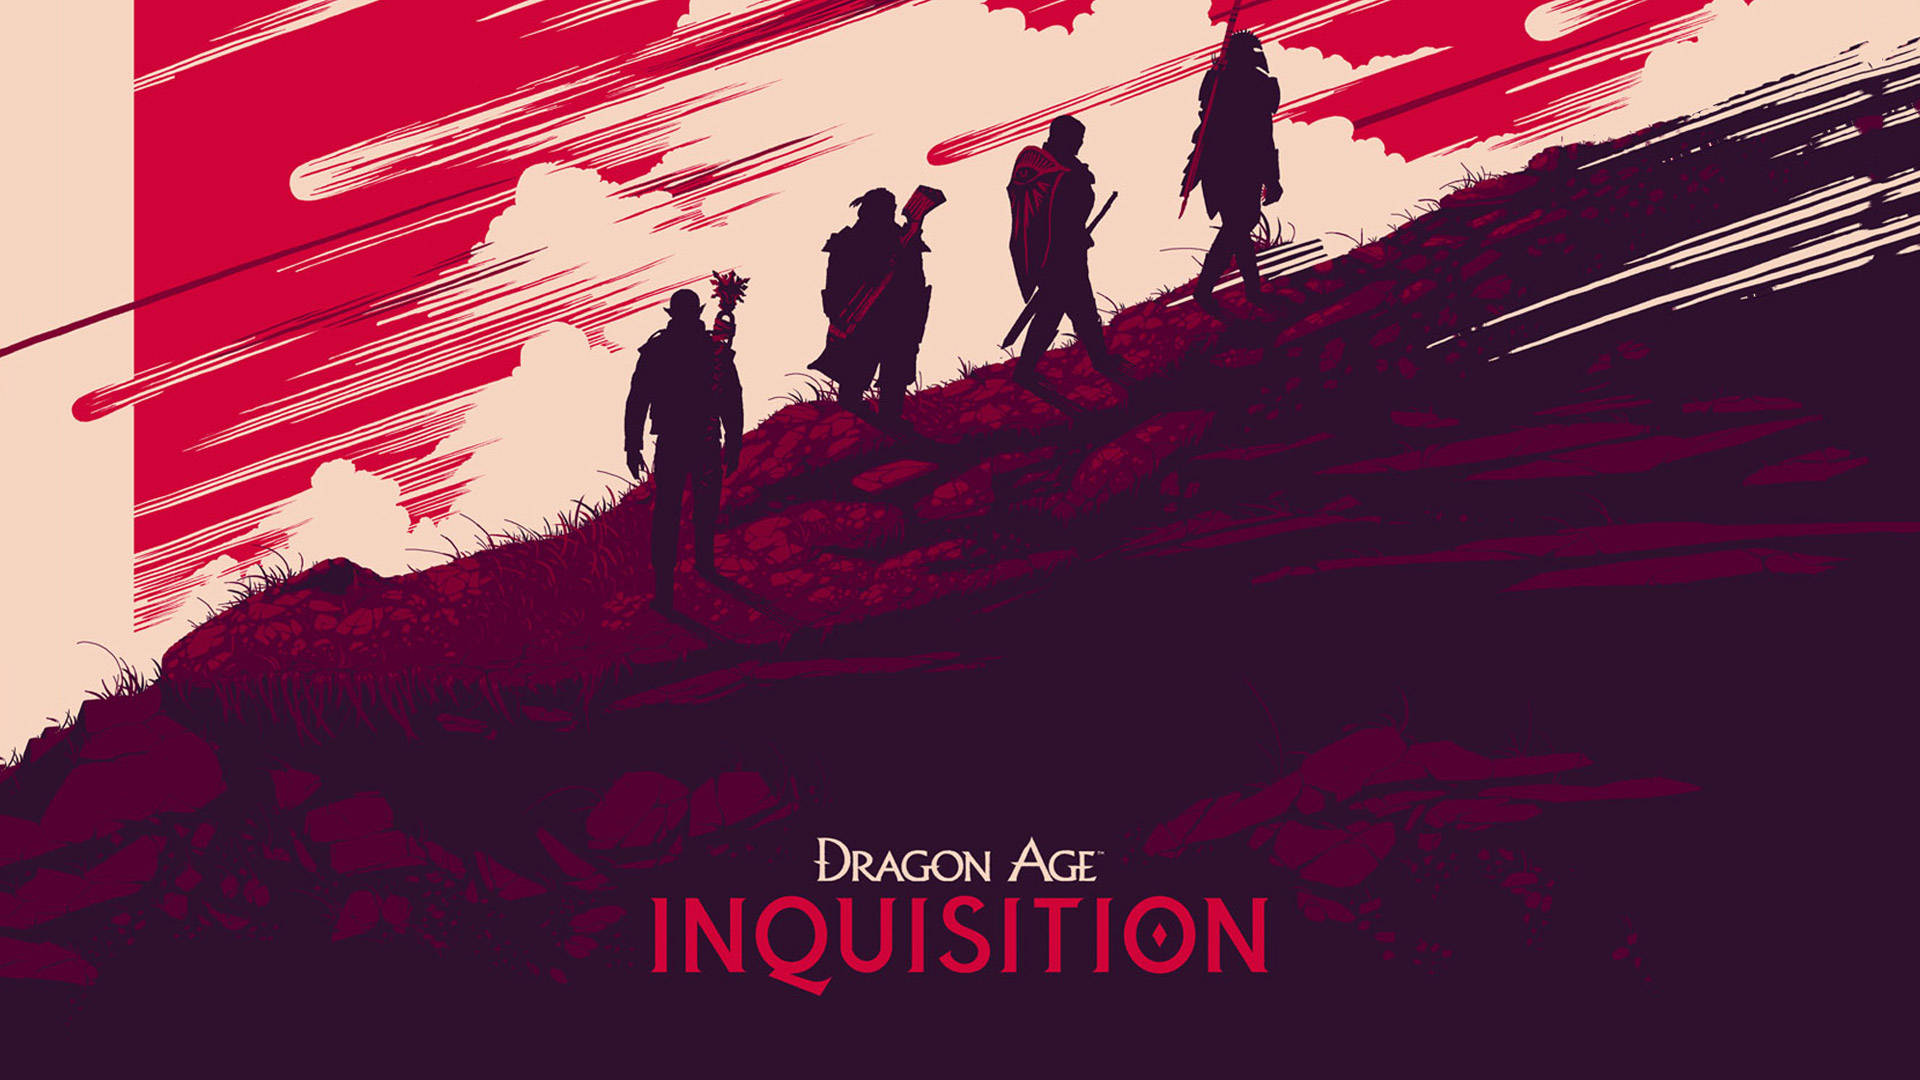 Red Themed Art Dragon Age Inquisition Wallpaper